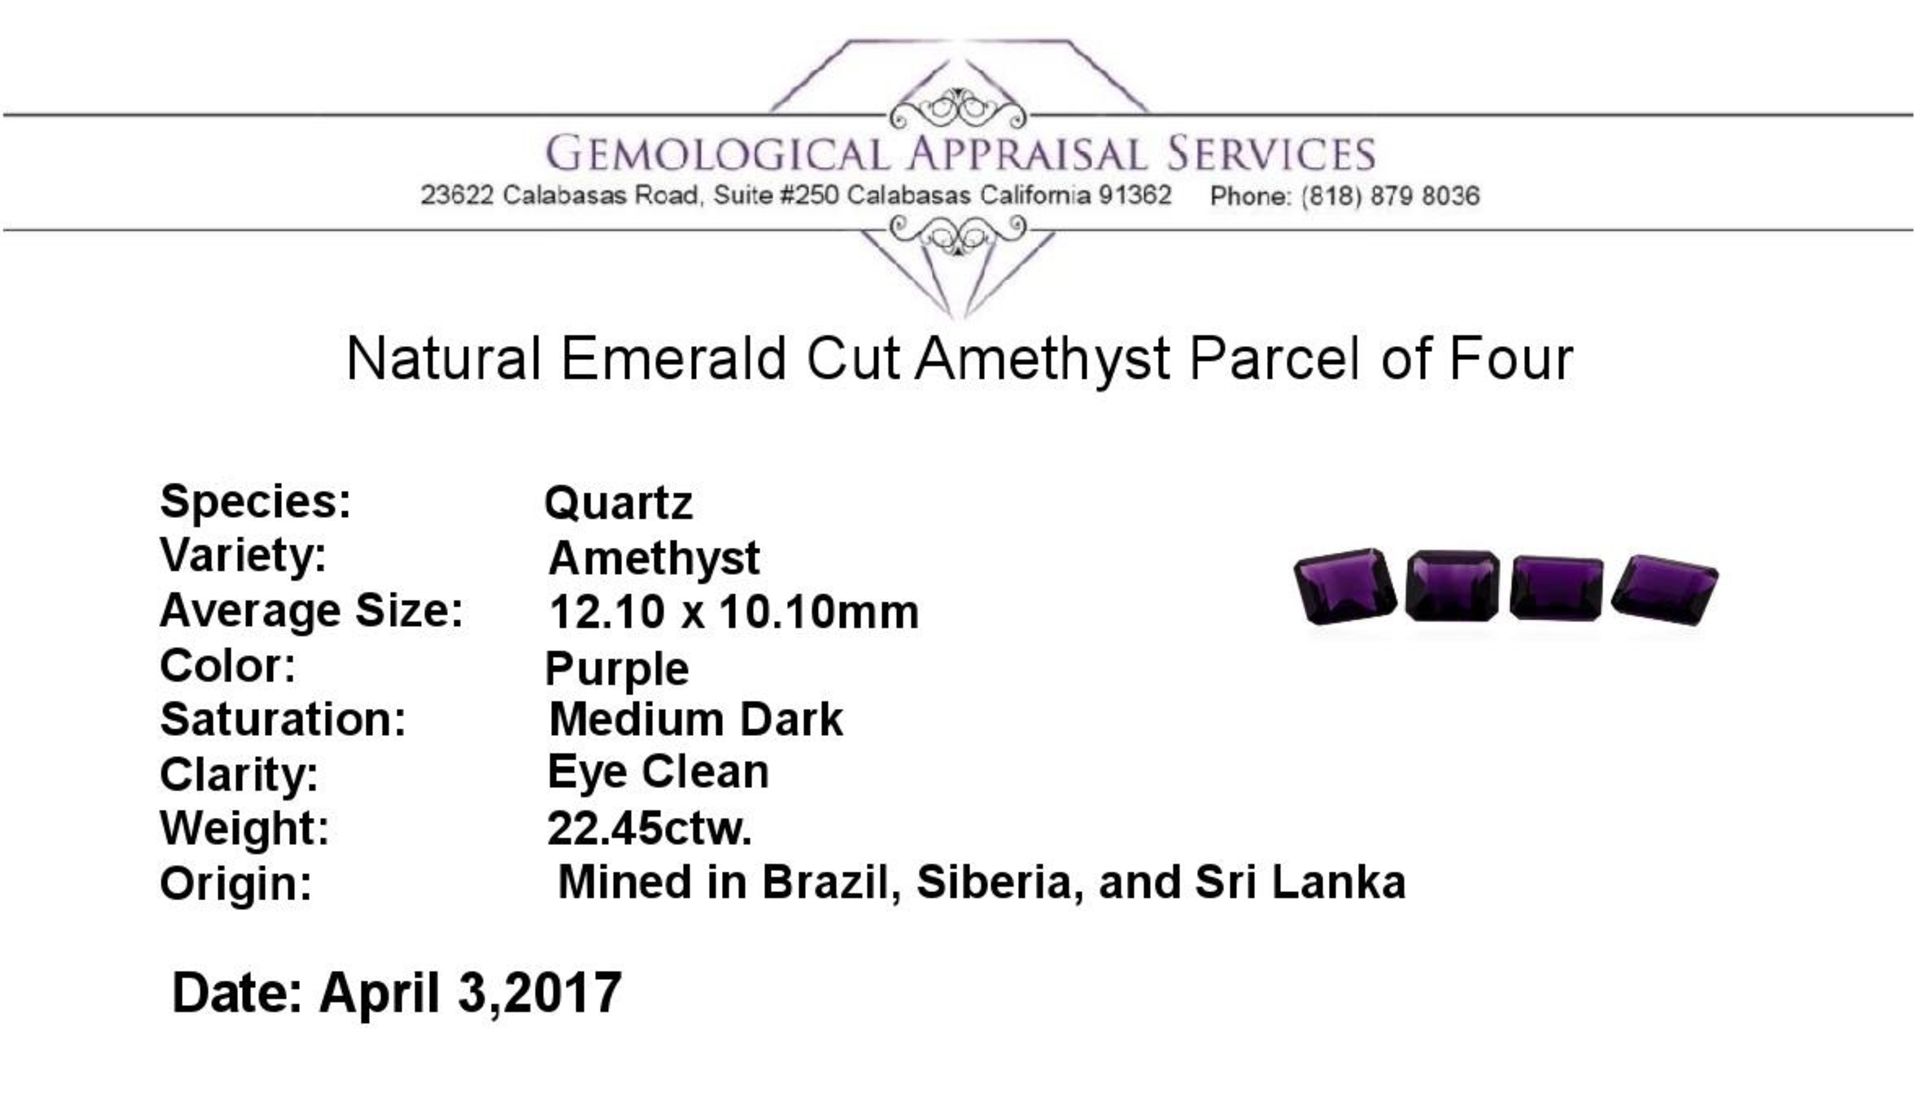 22.45ctw. Natural Emerald Cut Amethyst Parcel of Four - Image 3 of 3